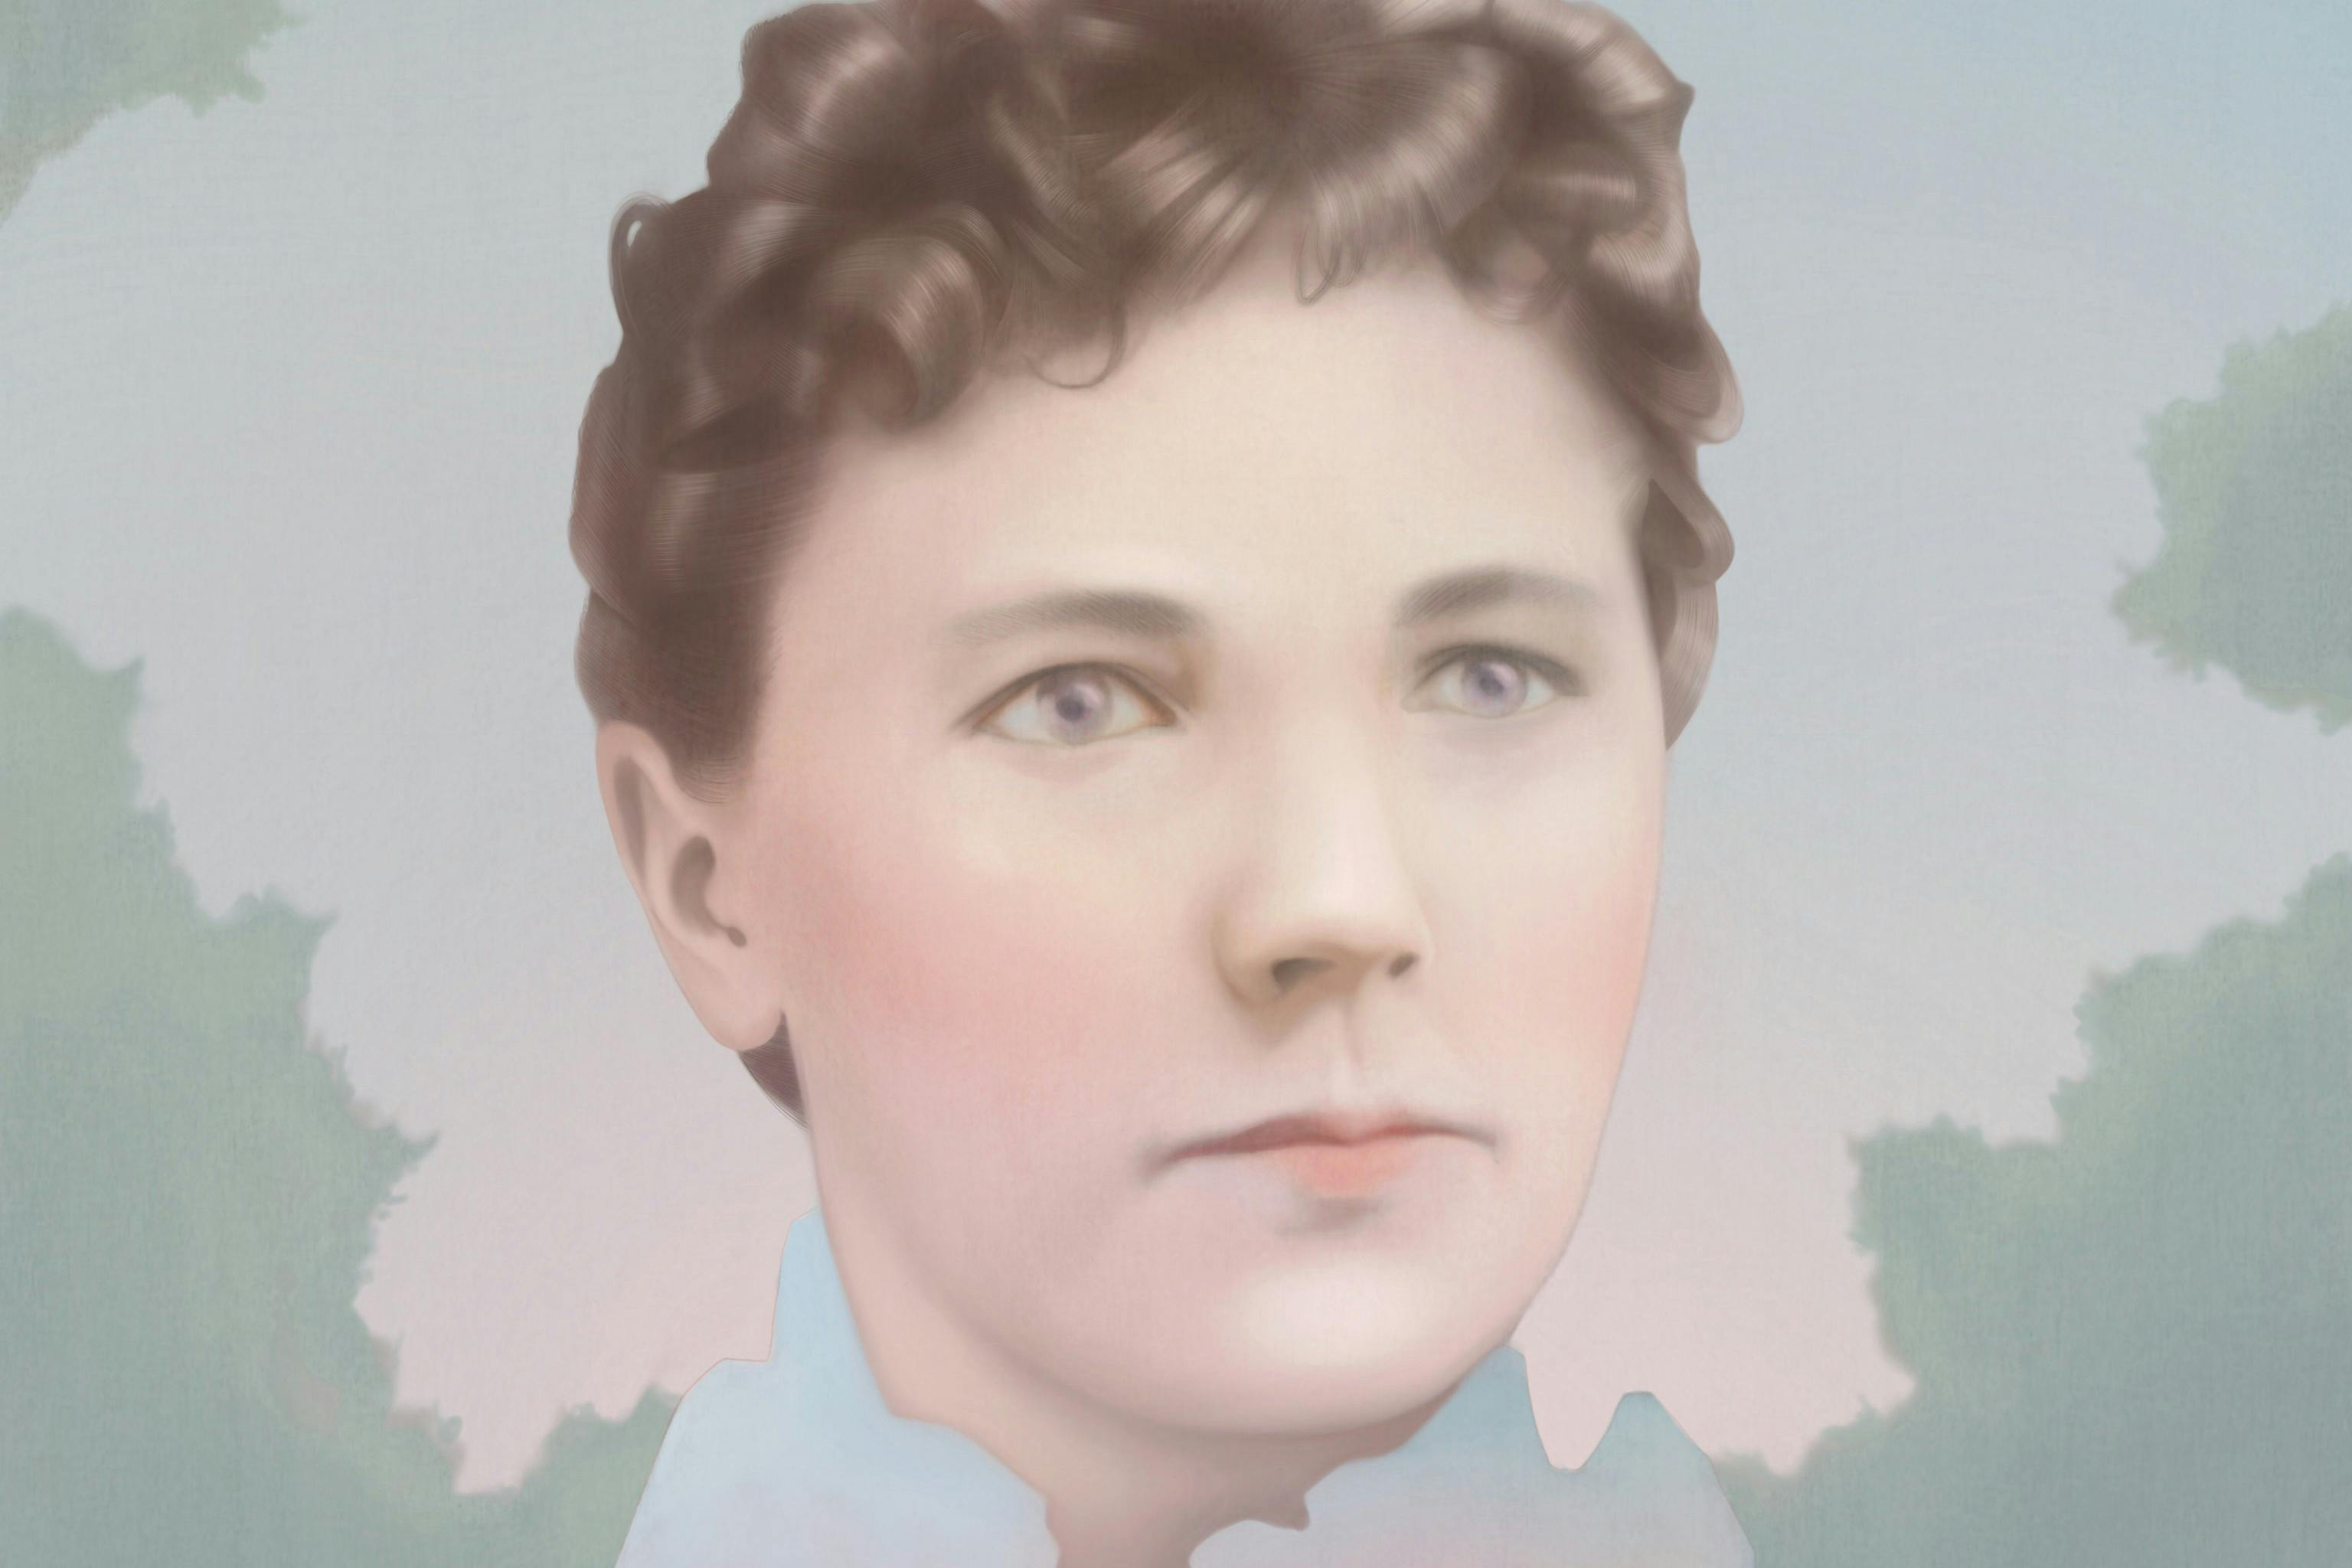 laura ingalls wilder facts interesting facts about laura ingalls wilder fun facts about laura ingalls wilder laura ingalls wilder facts for kids laura ingalls facts